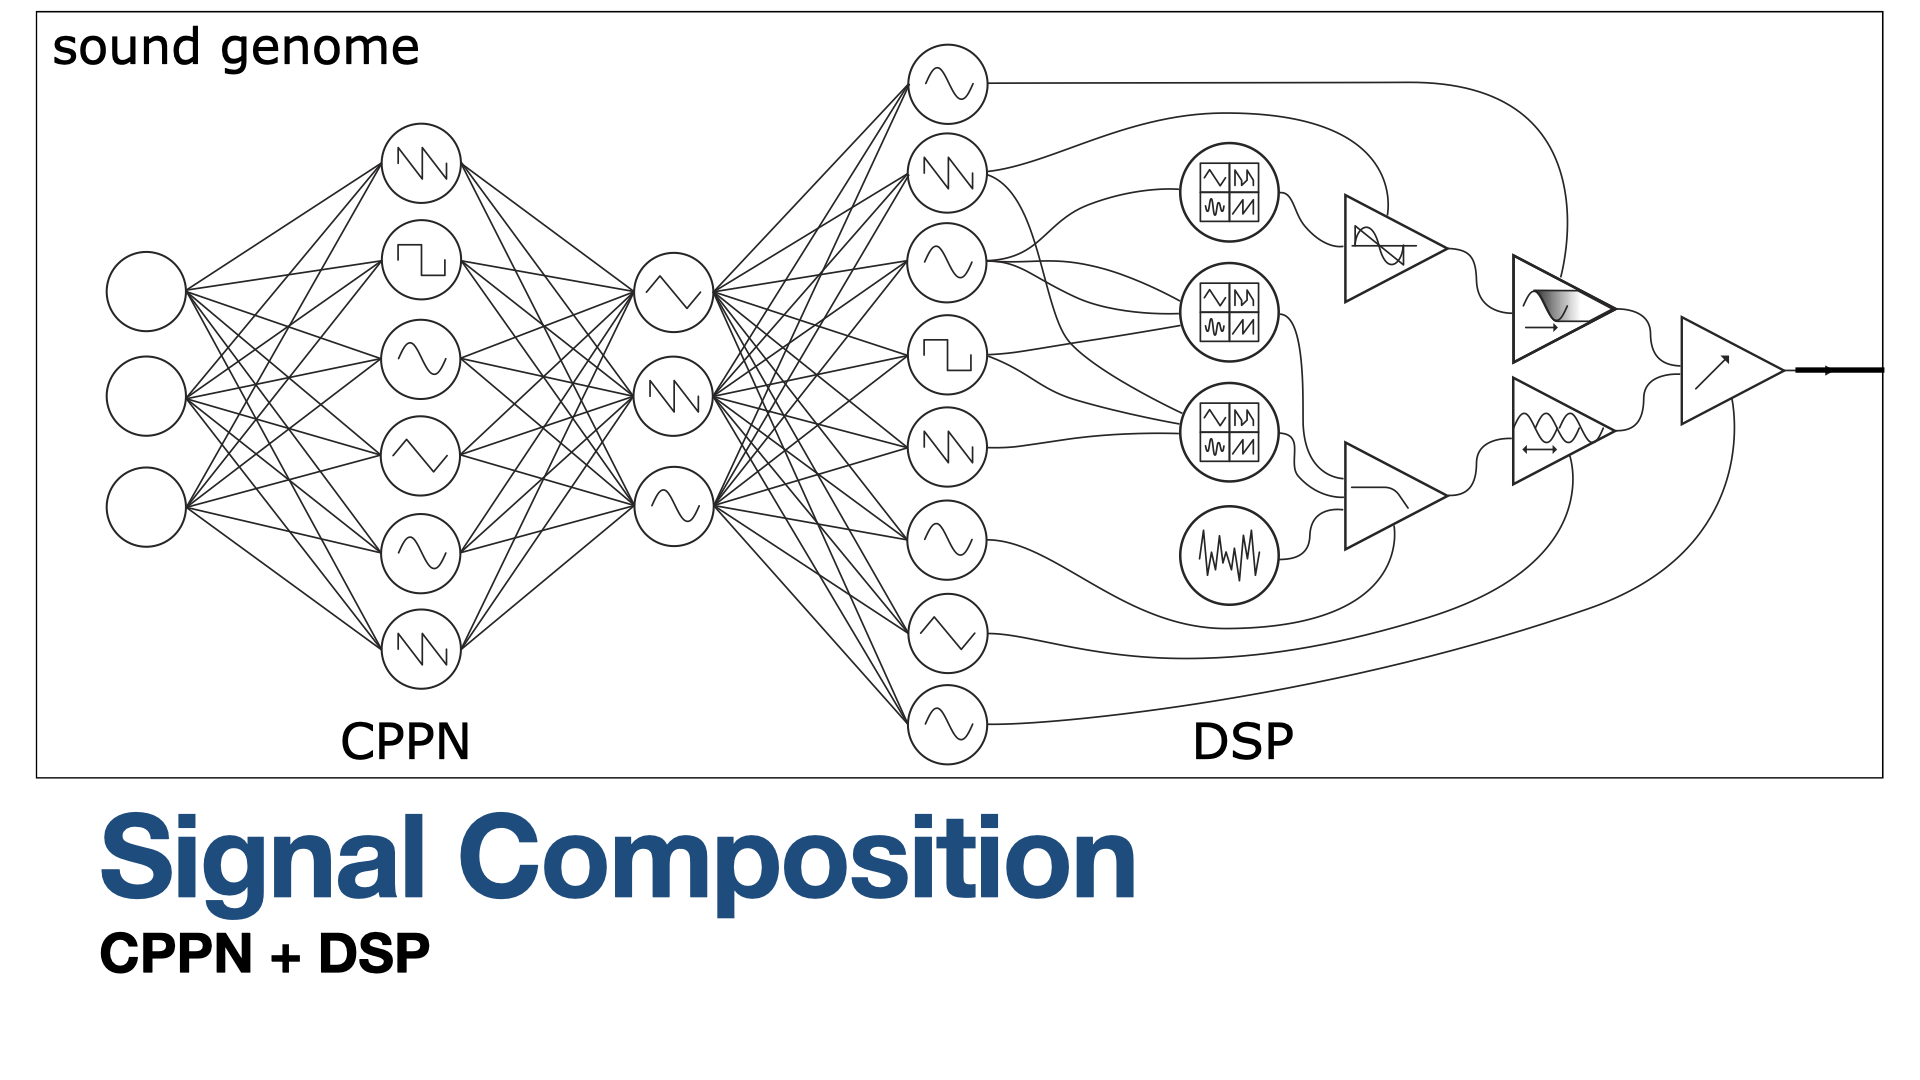 Signal Composition: CPPN + DSP